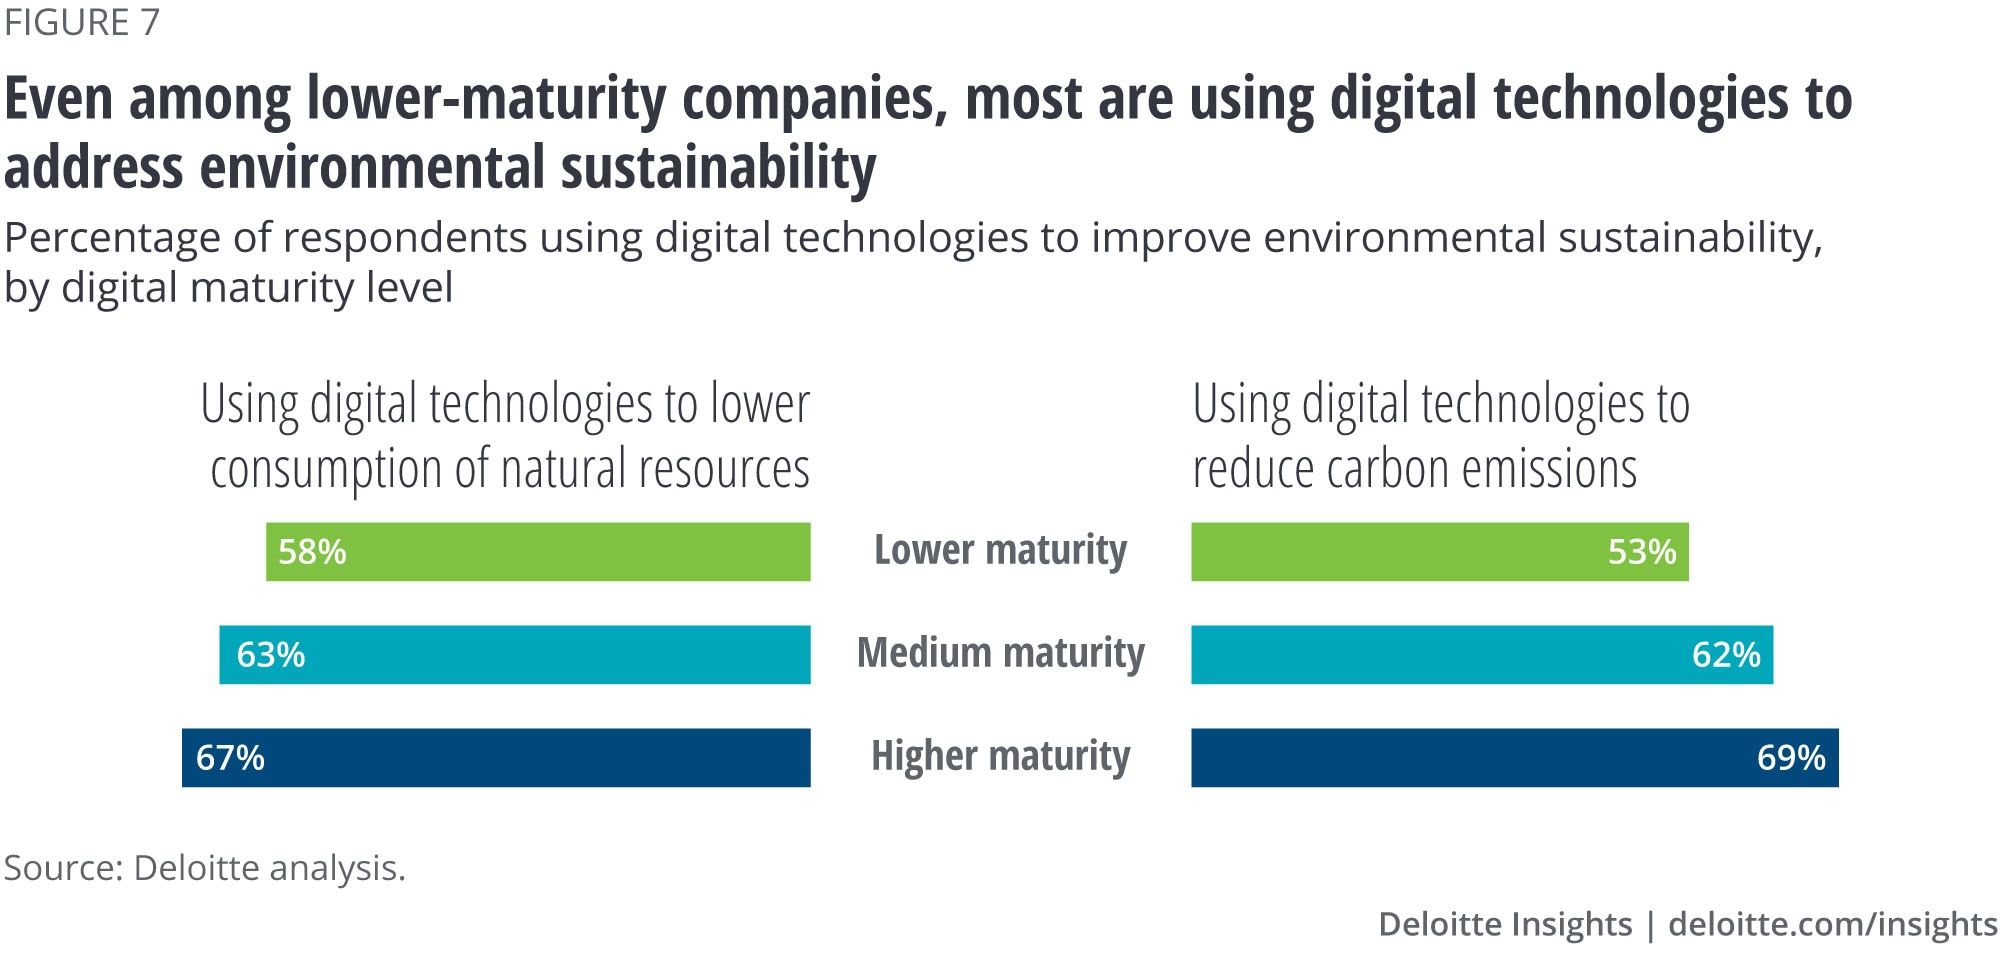 Even among lower-maturity companies, most are using digital technologies to address environment sustainability